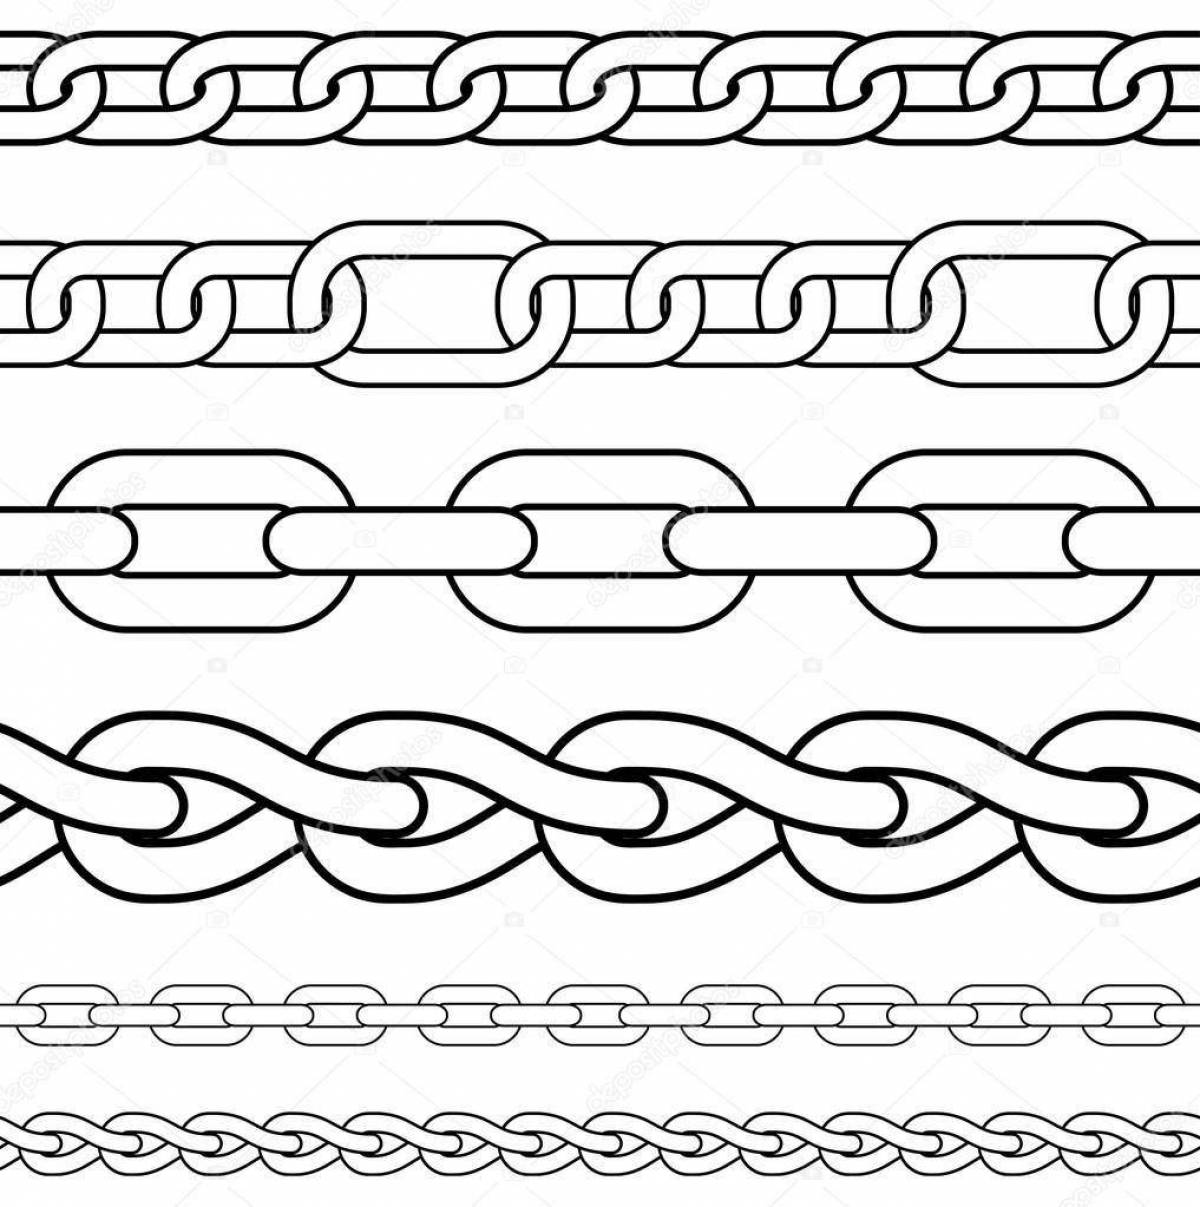 Coloring page of intricate chains